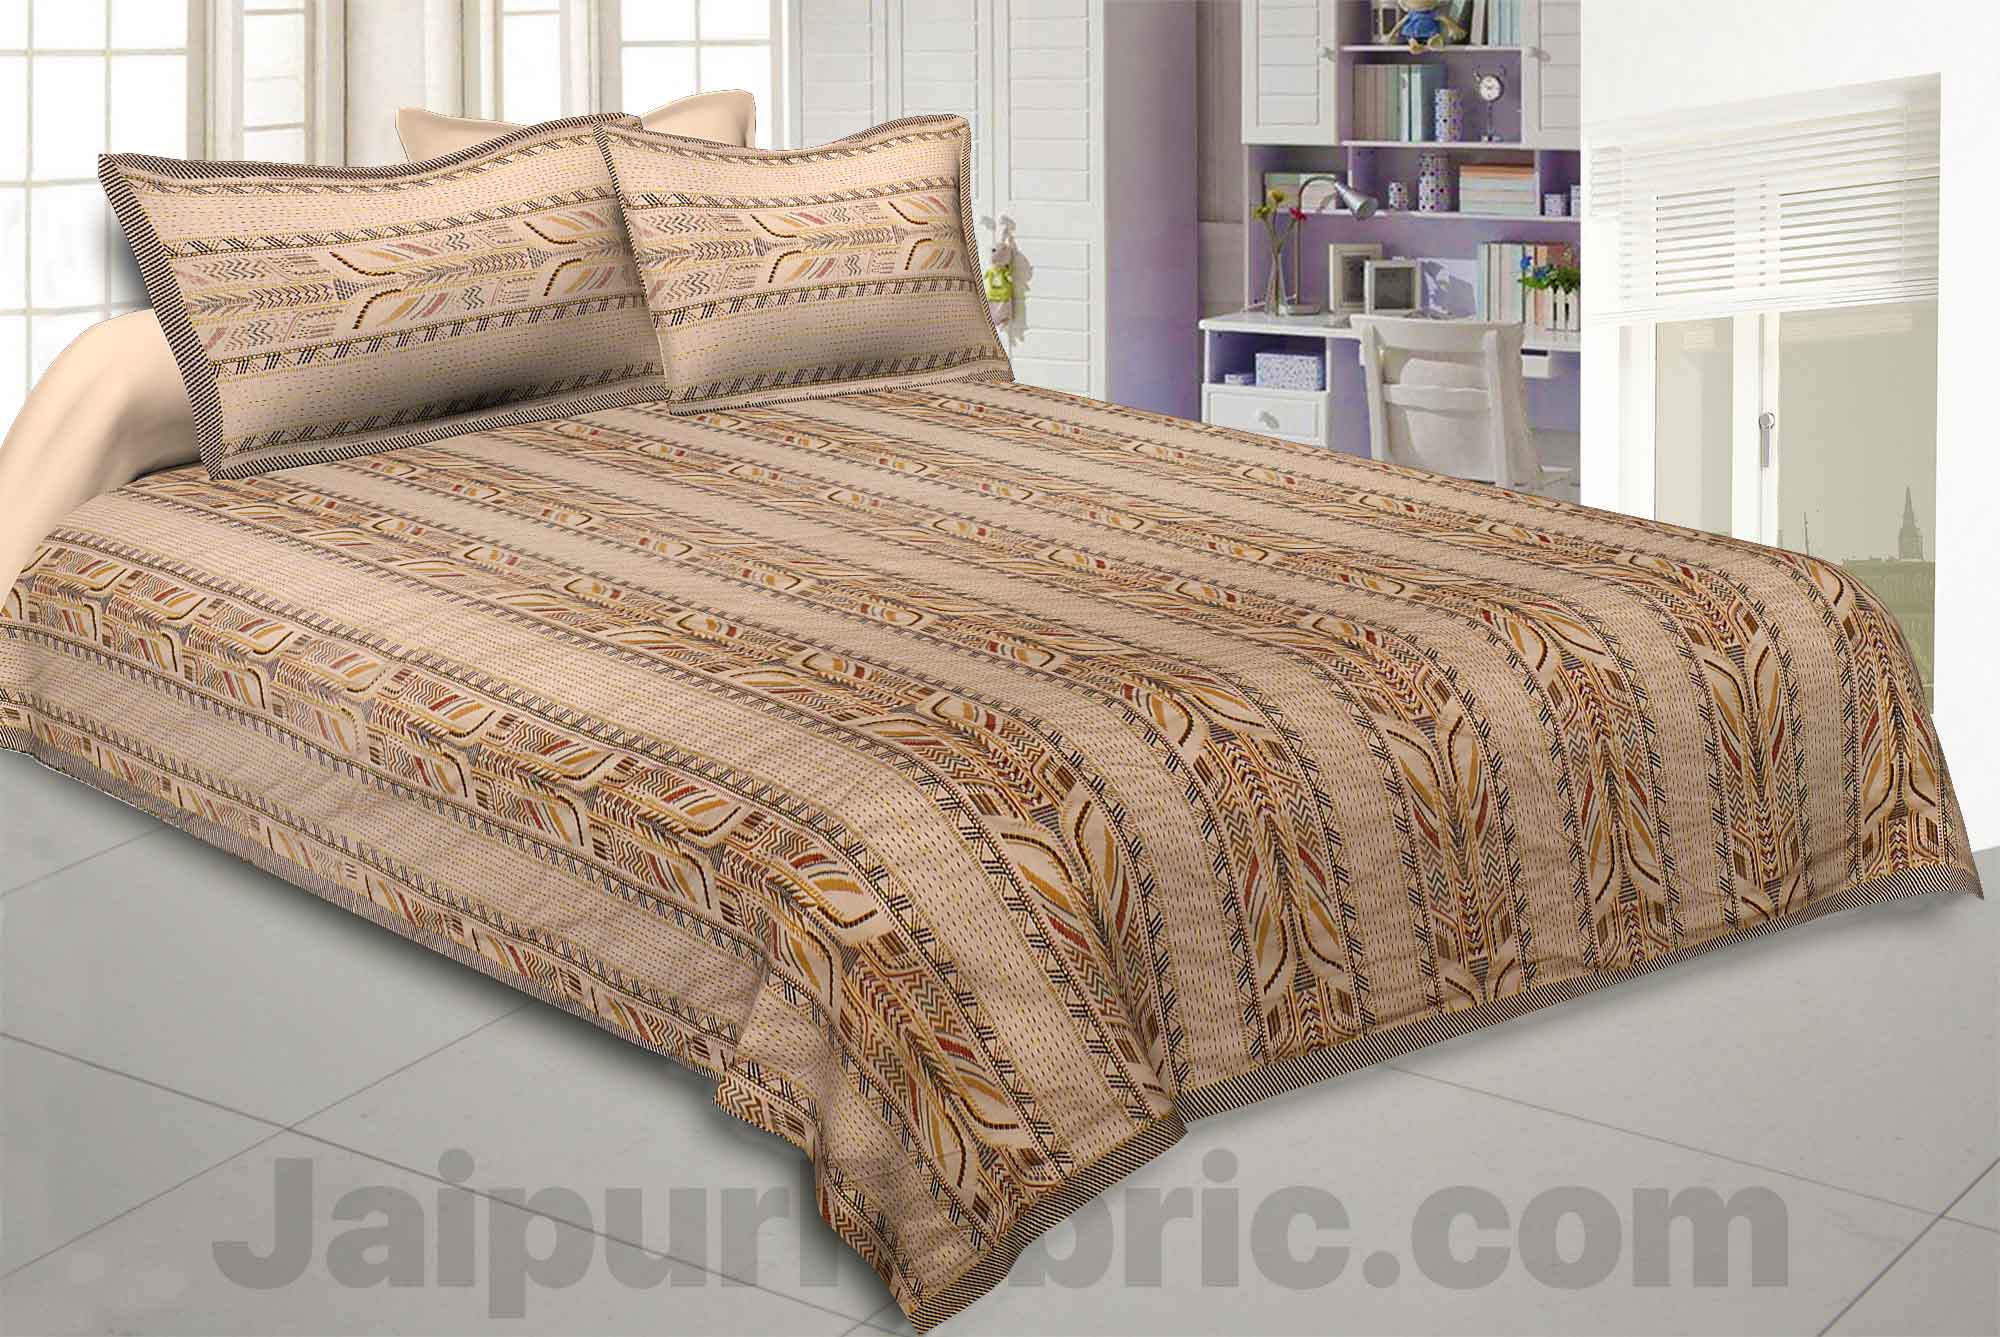 Brownish Maroon Lineal Style Kantha Thread Work Embroidery Double Bedsheet / Dohar / Light Blanket / Thin Comforter